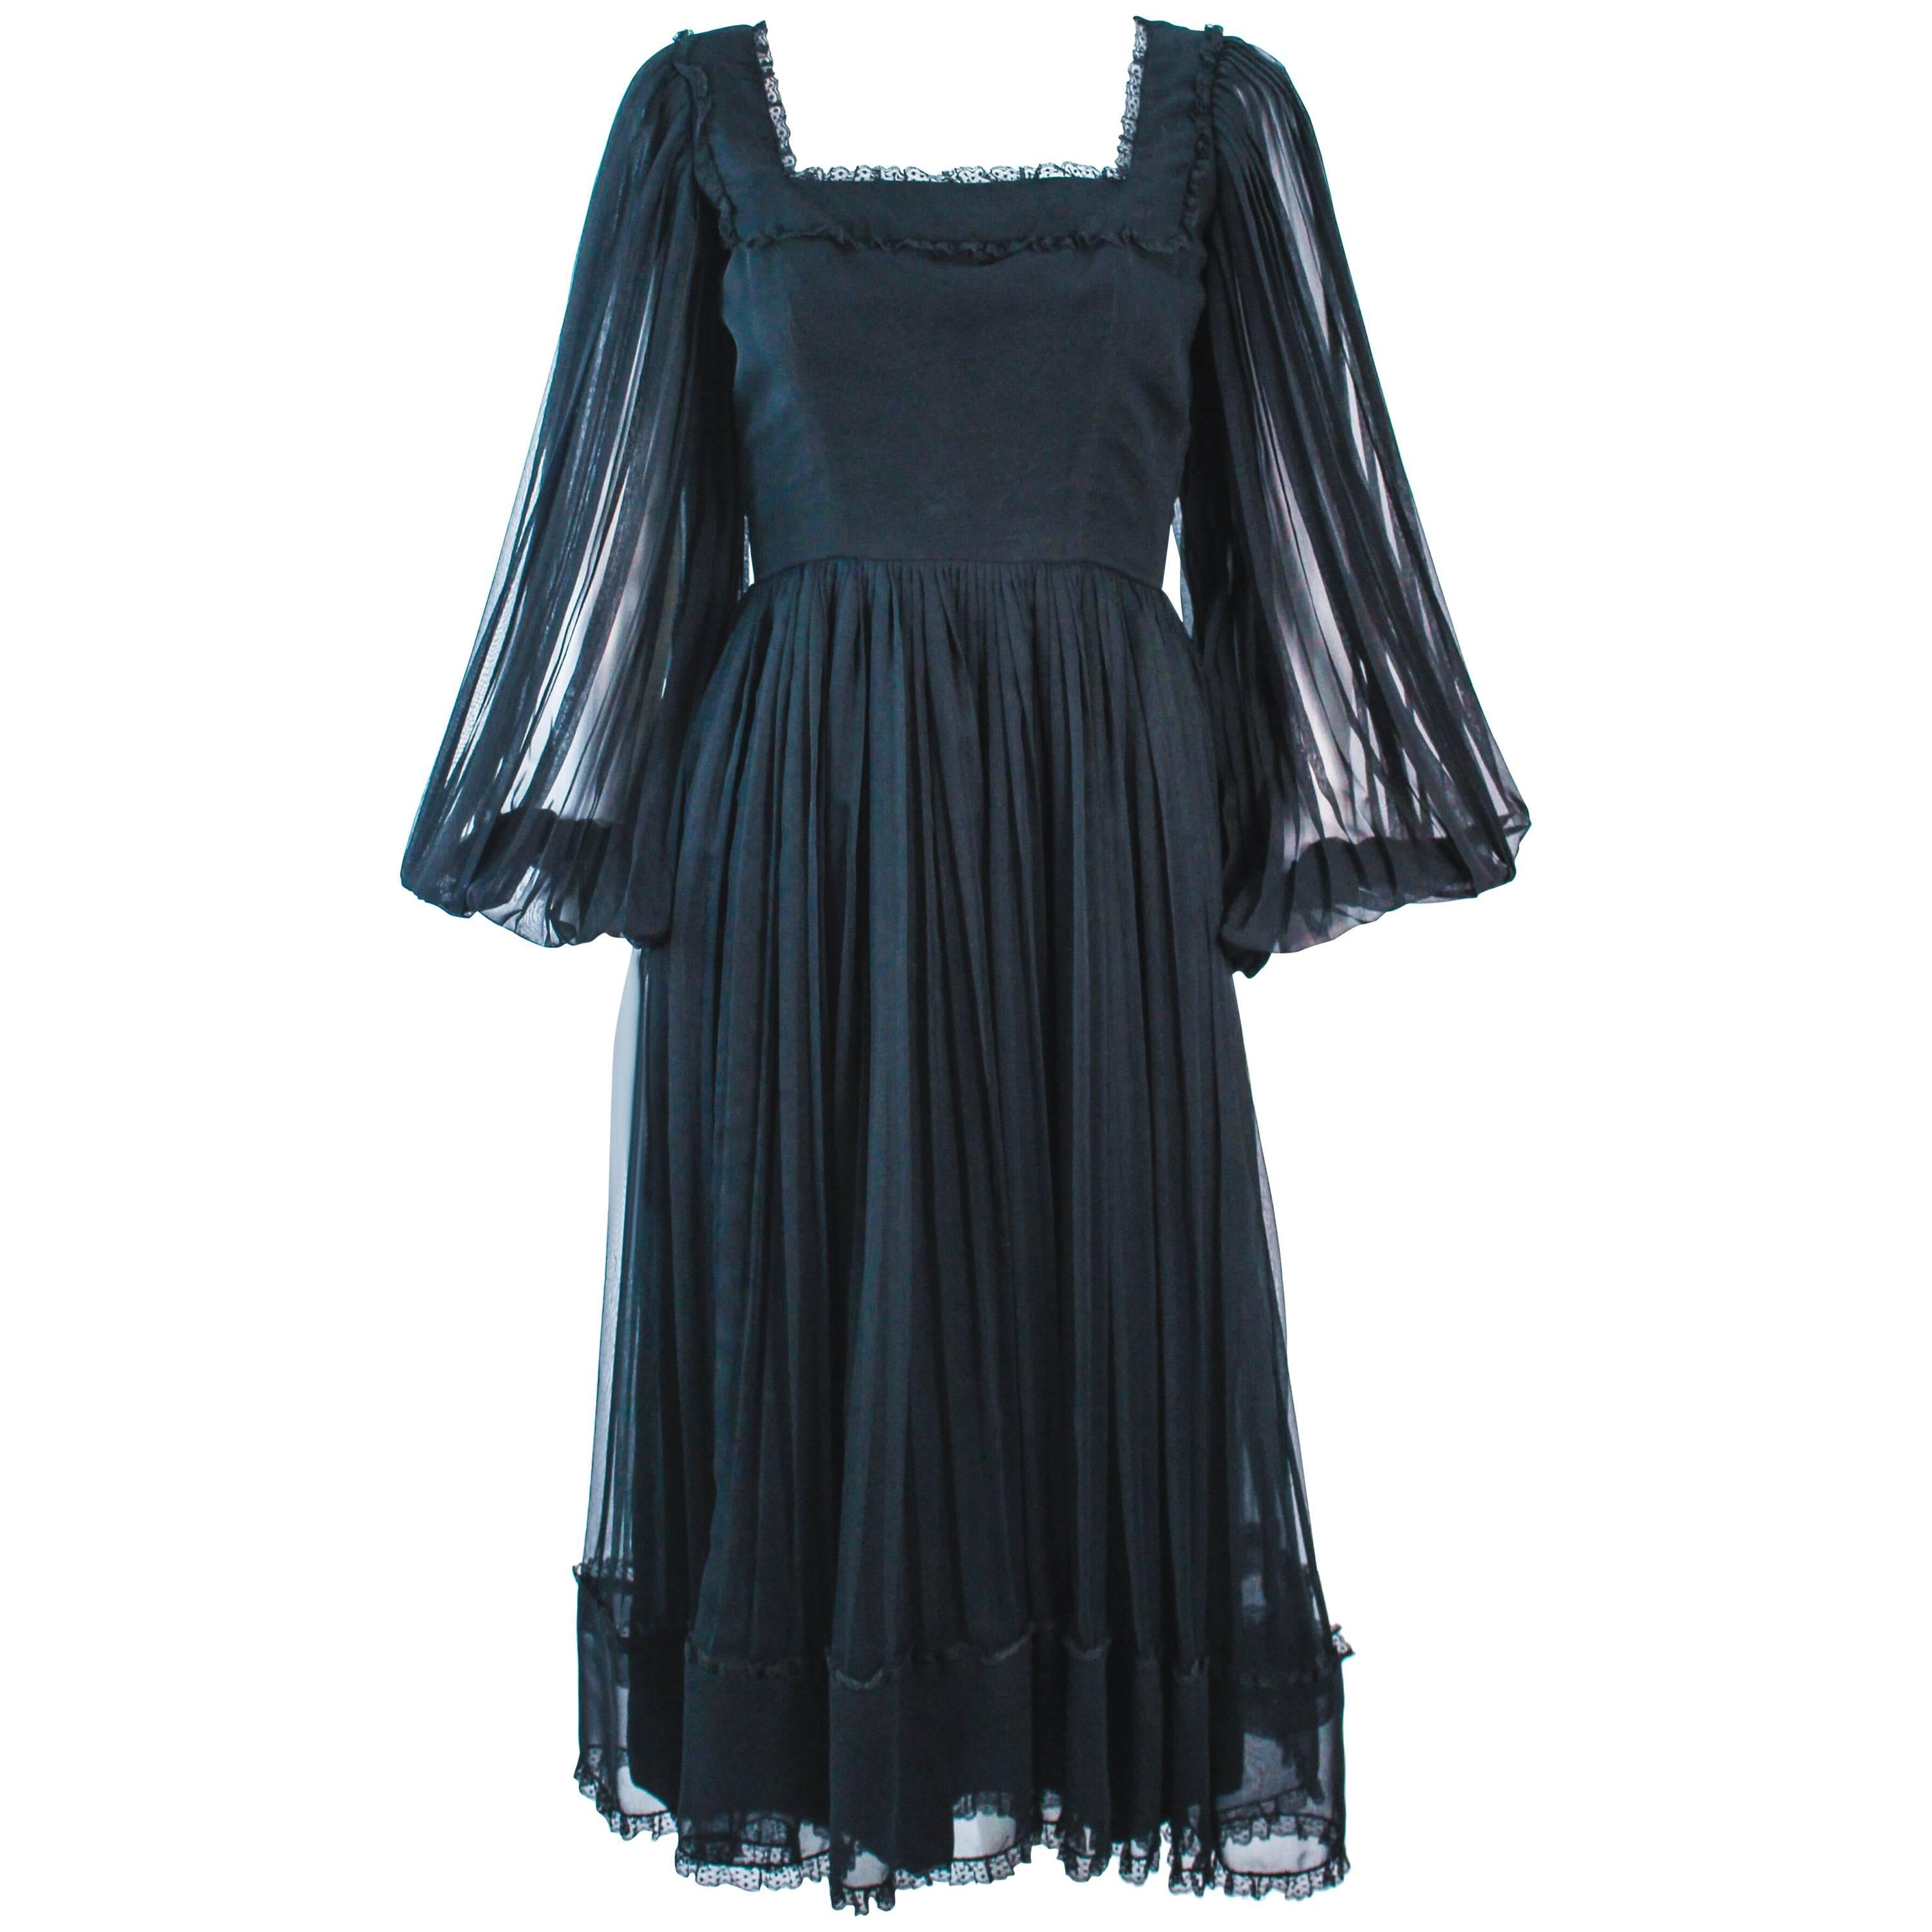 JEAN LOUIS Black Pleated Lace Dress with Sheer Sleeves Size 4 6